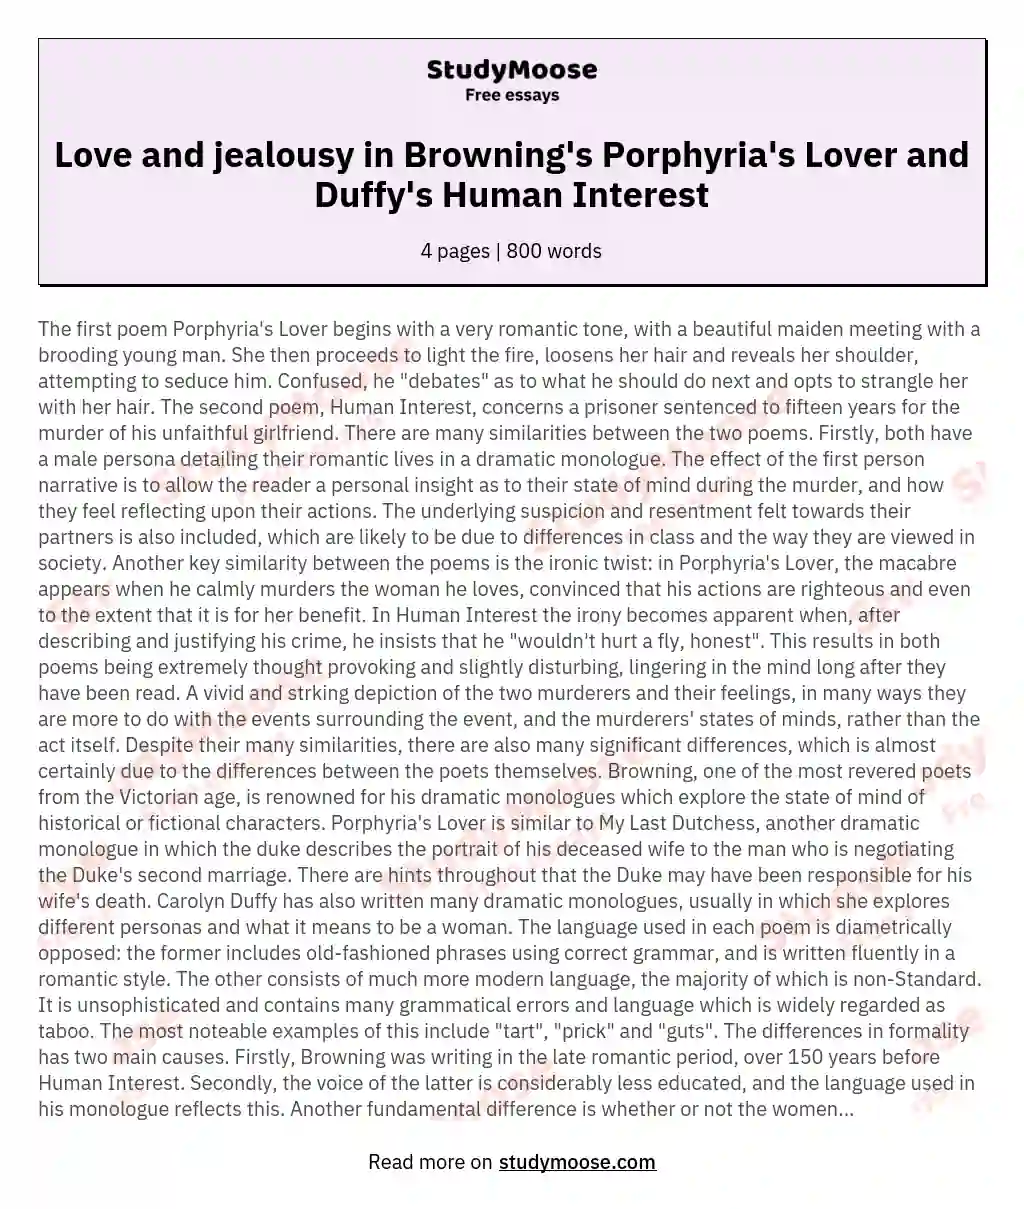 How do Robert Browing in Porphyria's Lover and Carol Ann Duffy in Human Interest present the emotions of love and jealousy?